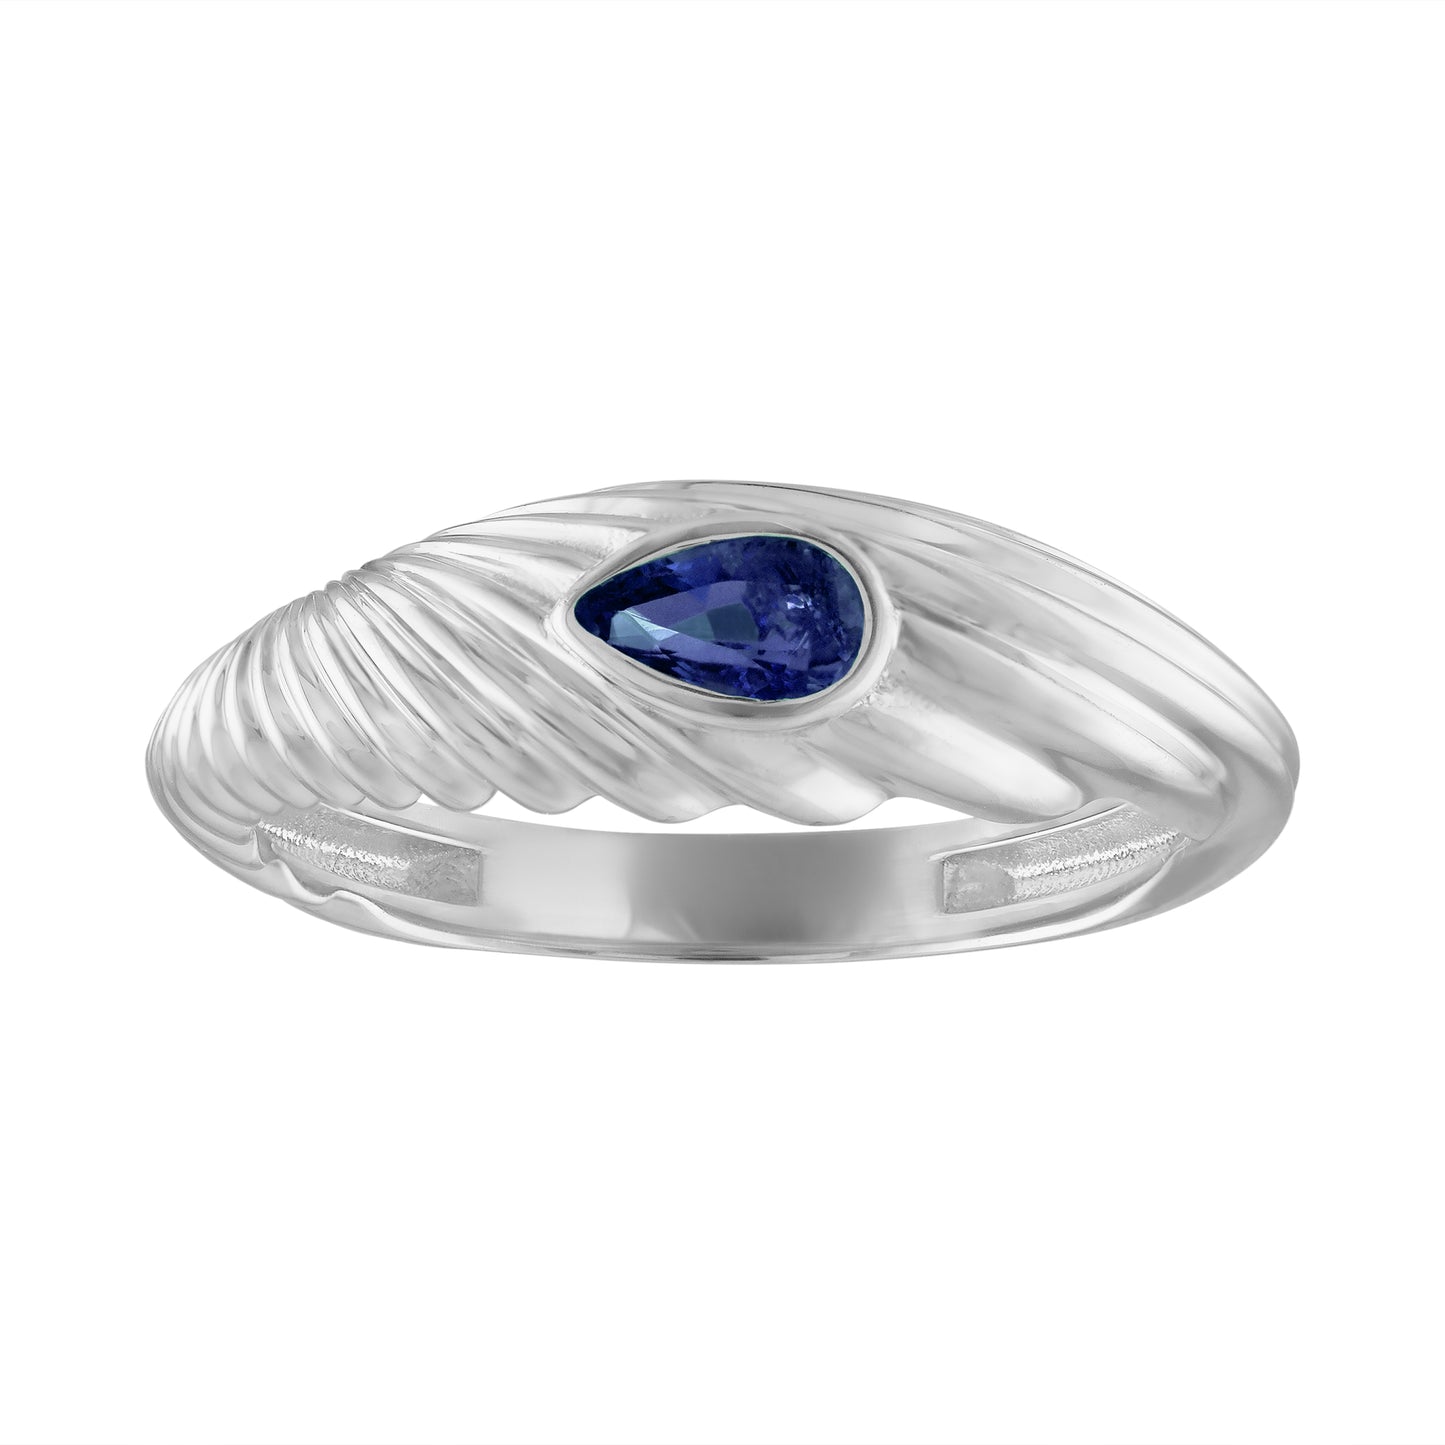 White gold fluted band with a bezeled sapphire in the center.